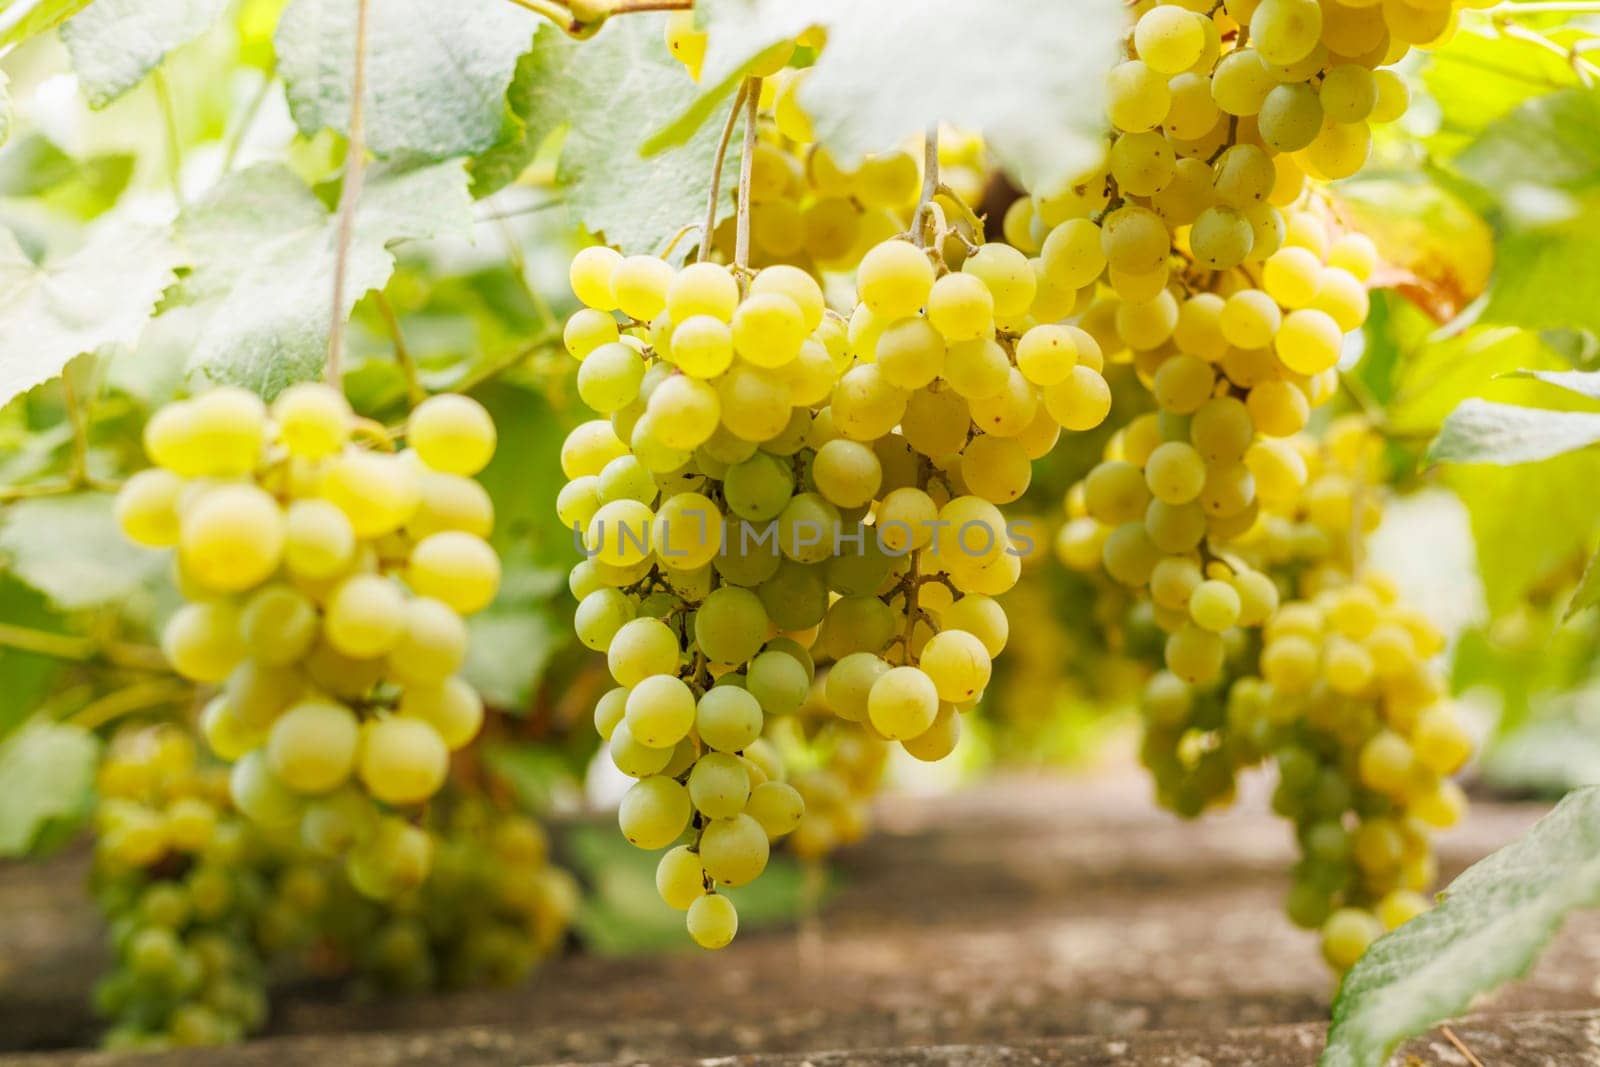 Ripe Grapes Cluster on Vine in Sunlight by andreyz